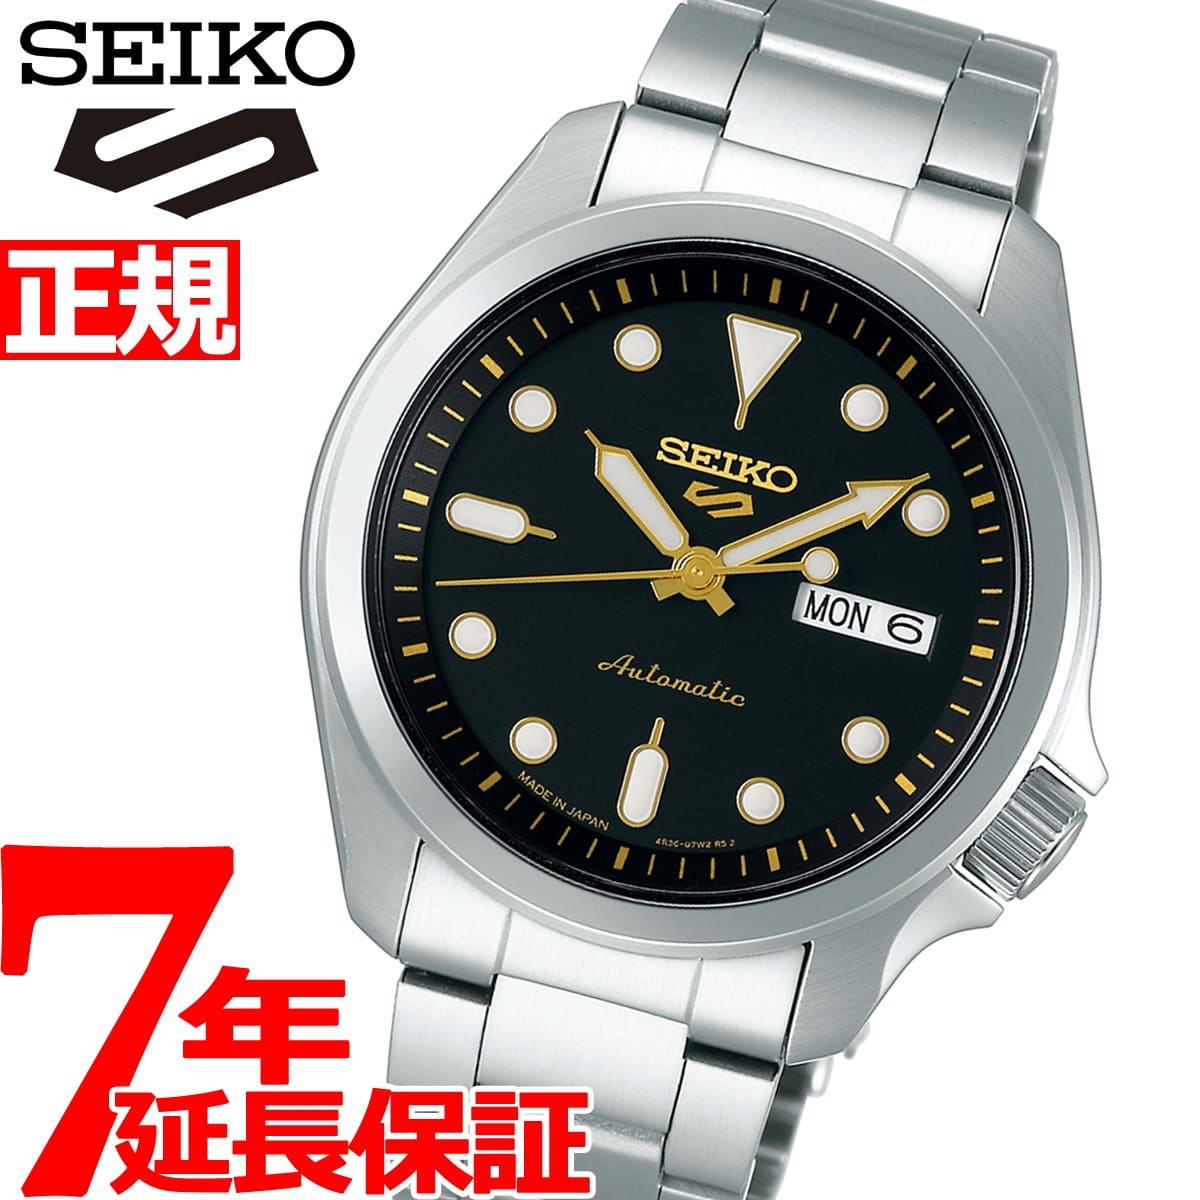 New]SEIKO 5 SPORTS Men's Automatic Mechanical Watch Limited Model SBSA047 -  BE FORWARD Store